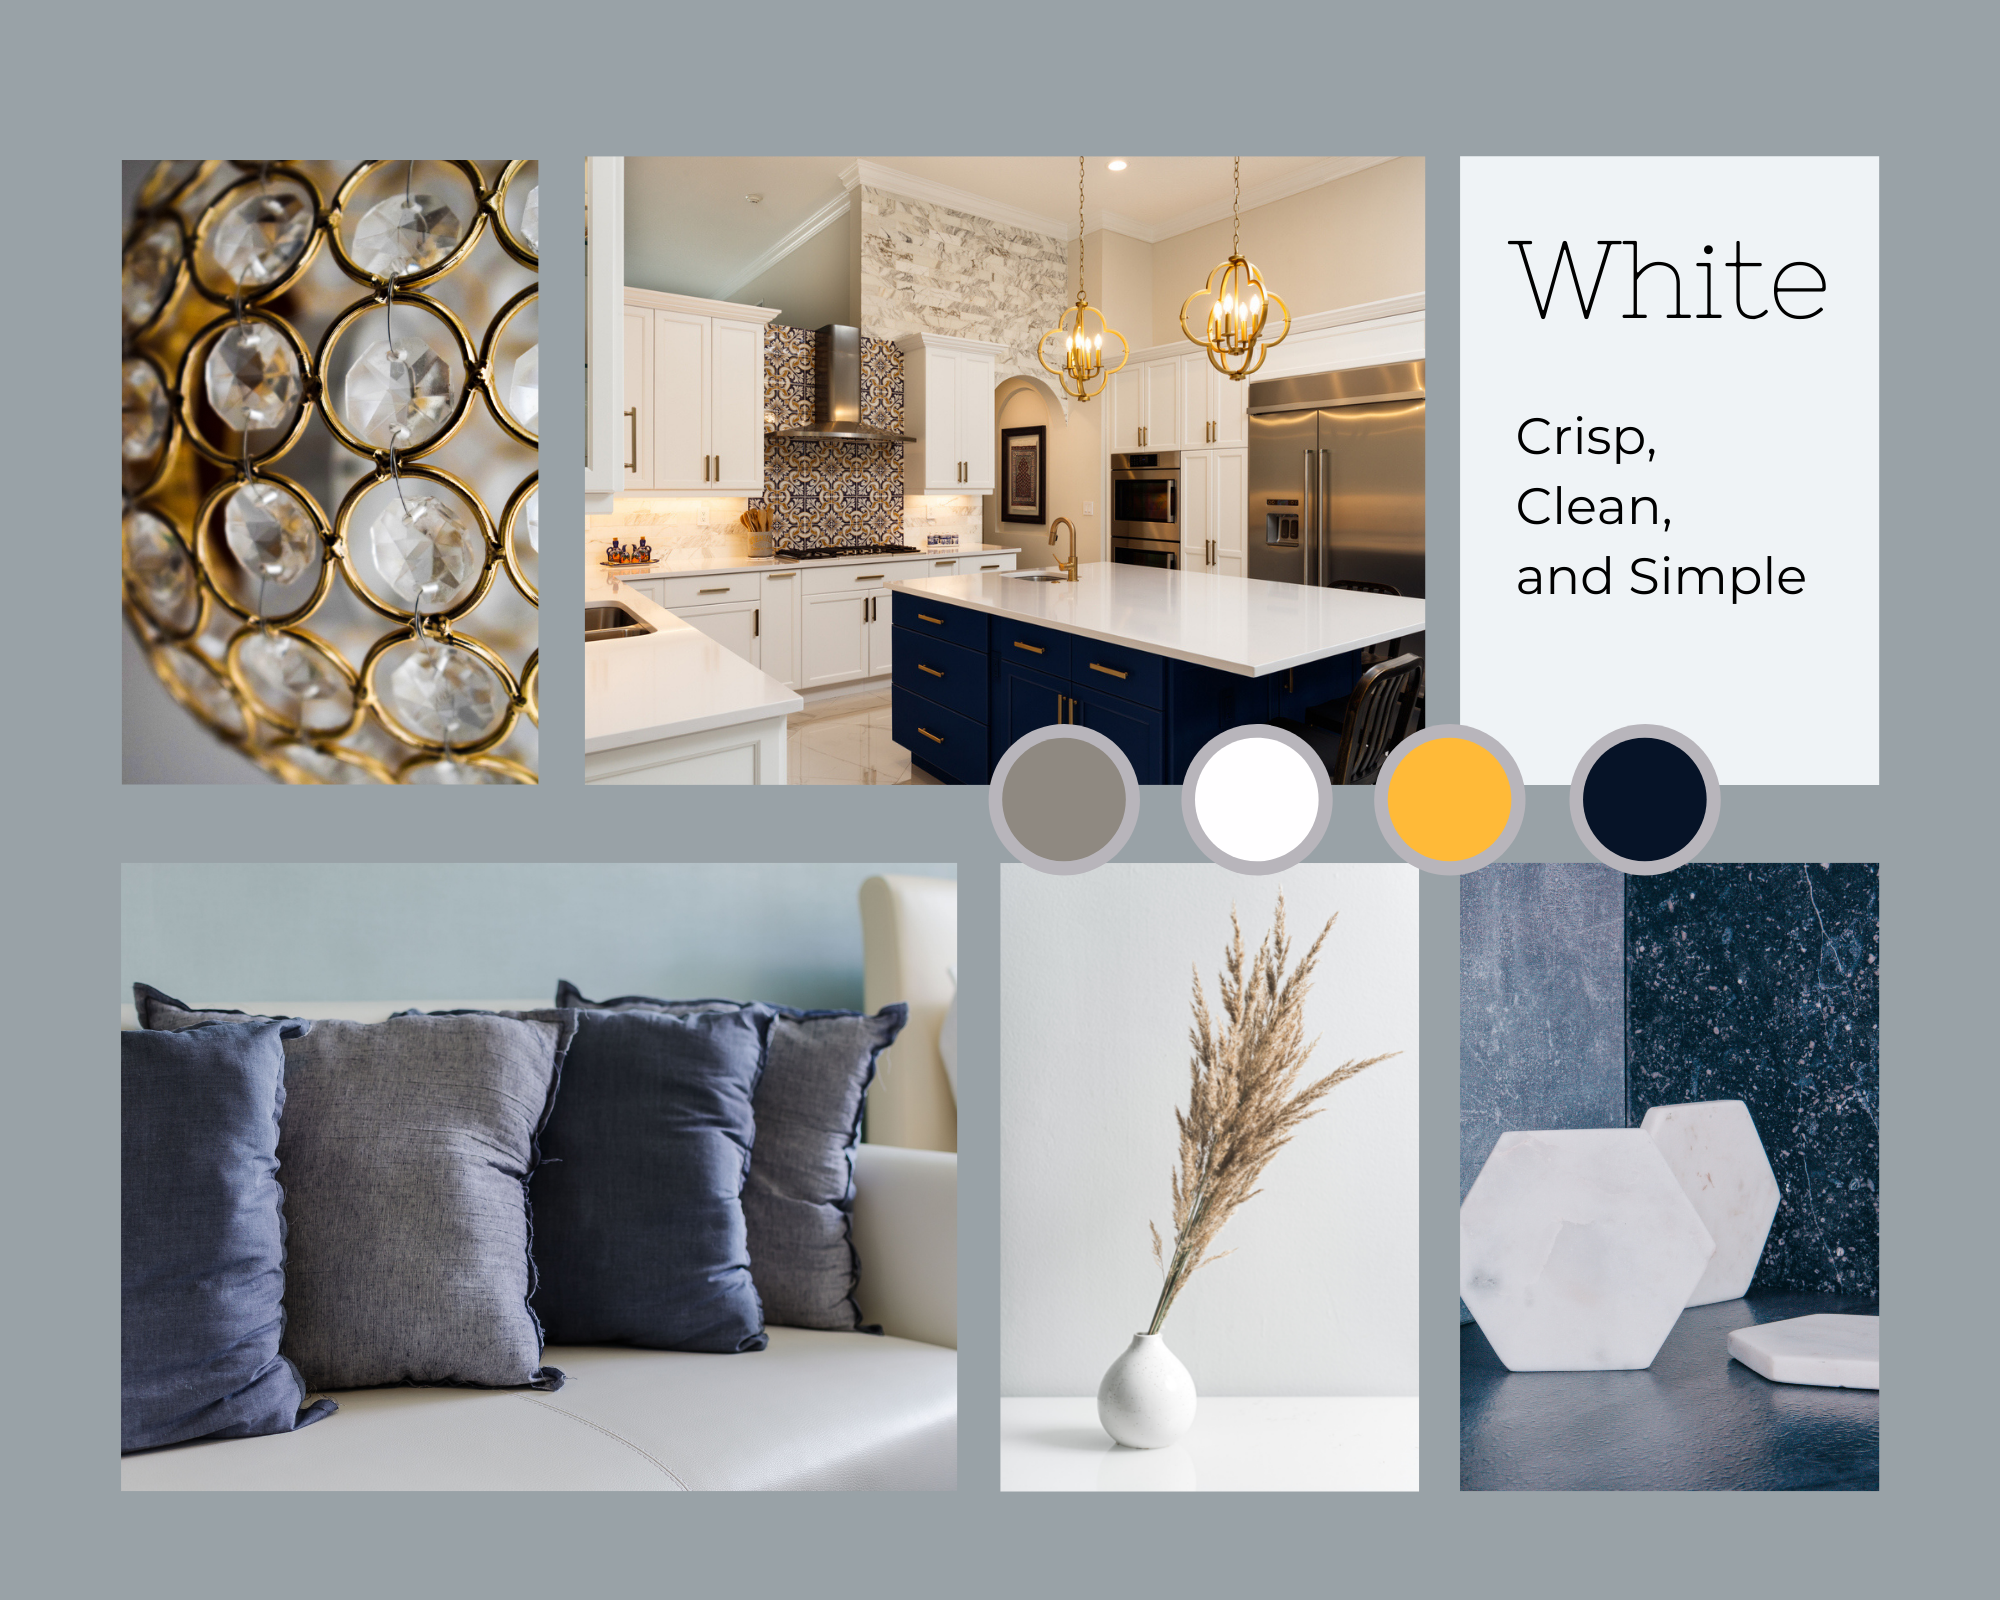 White – Crisp, Clean, and Simple